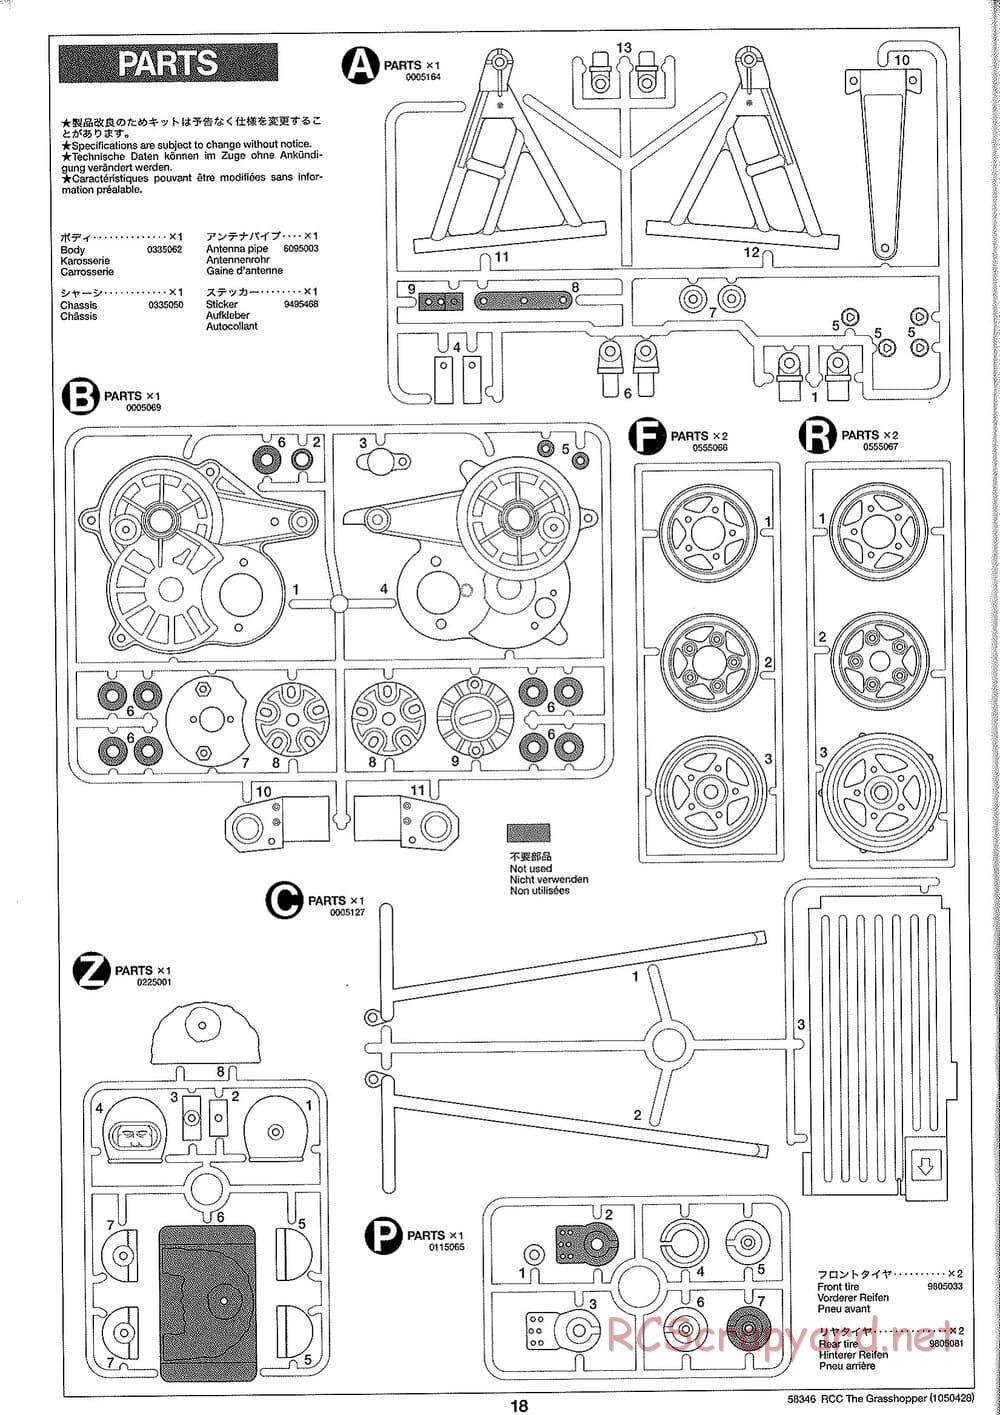 Tamiya - The Grasshopper (2005) - GH Chassis - Manual - Page 18